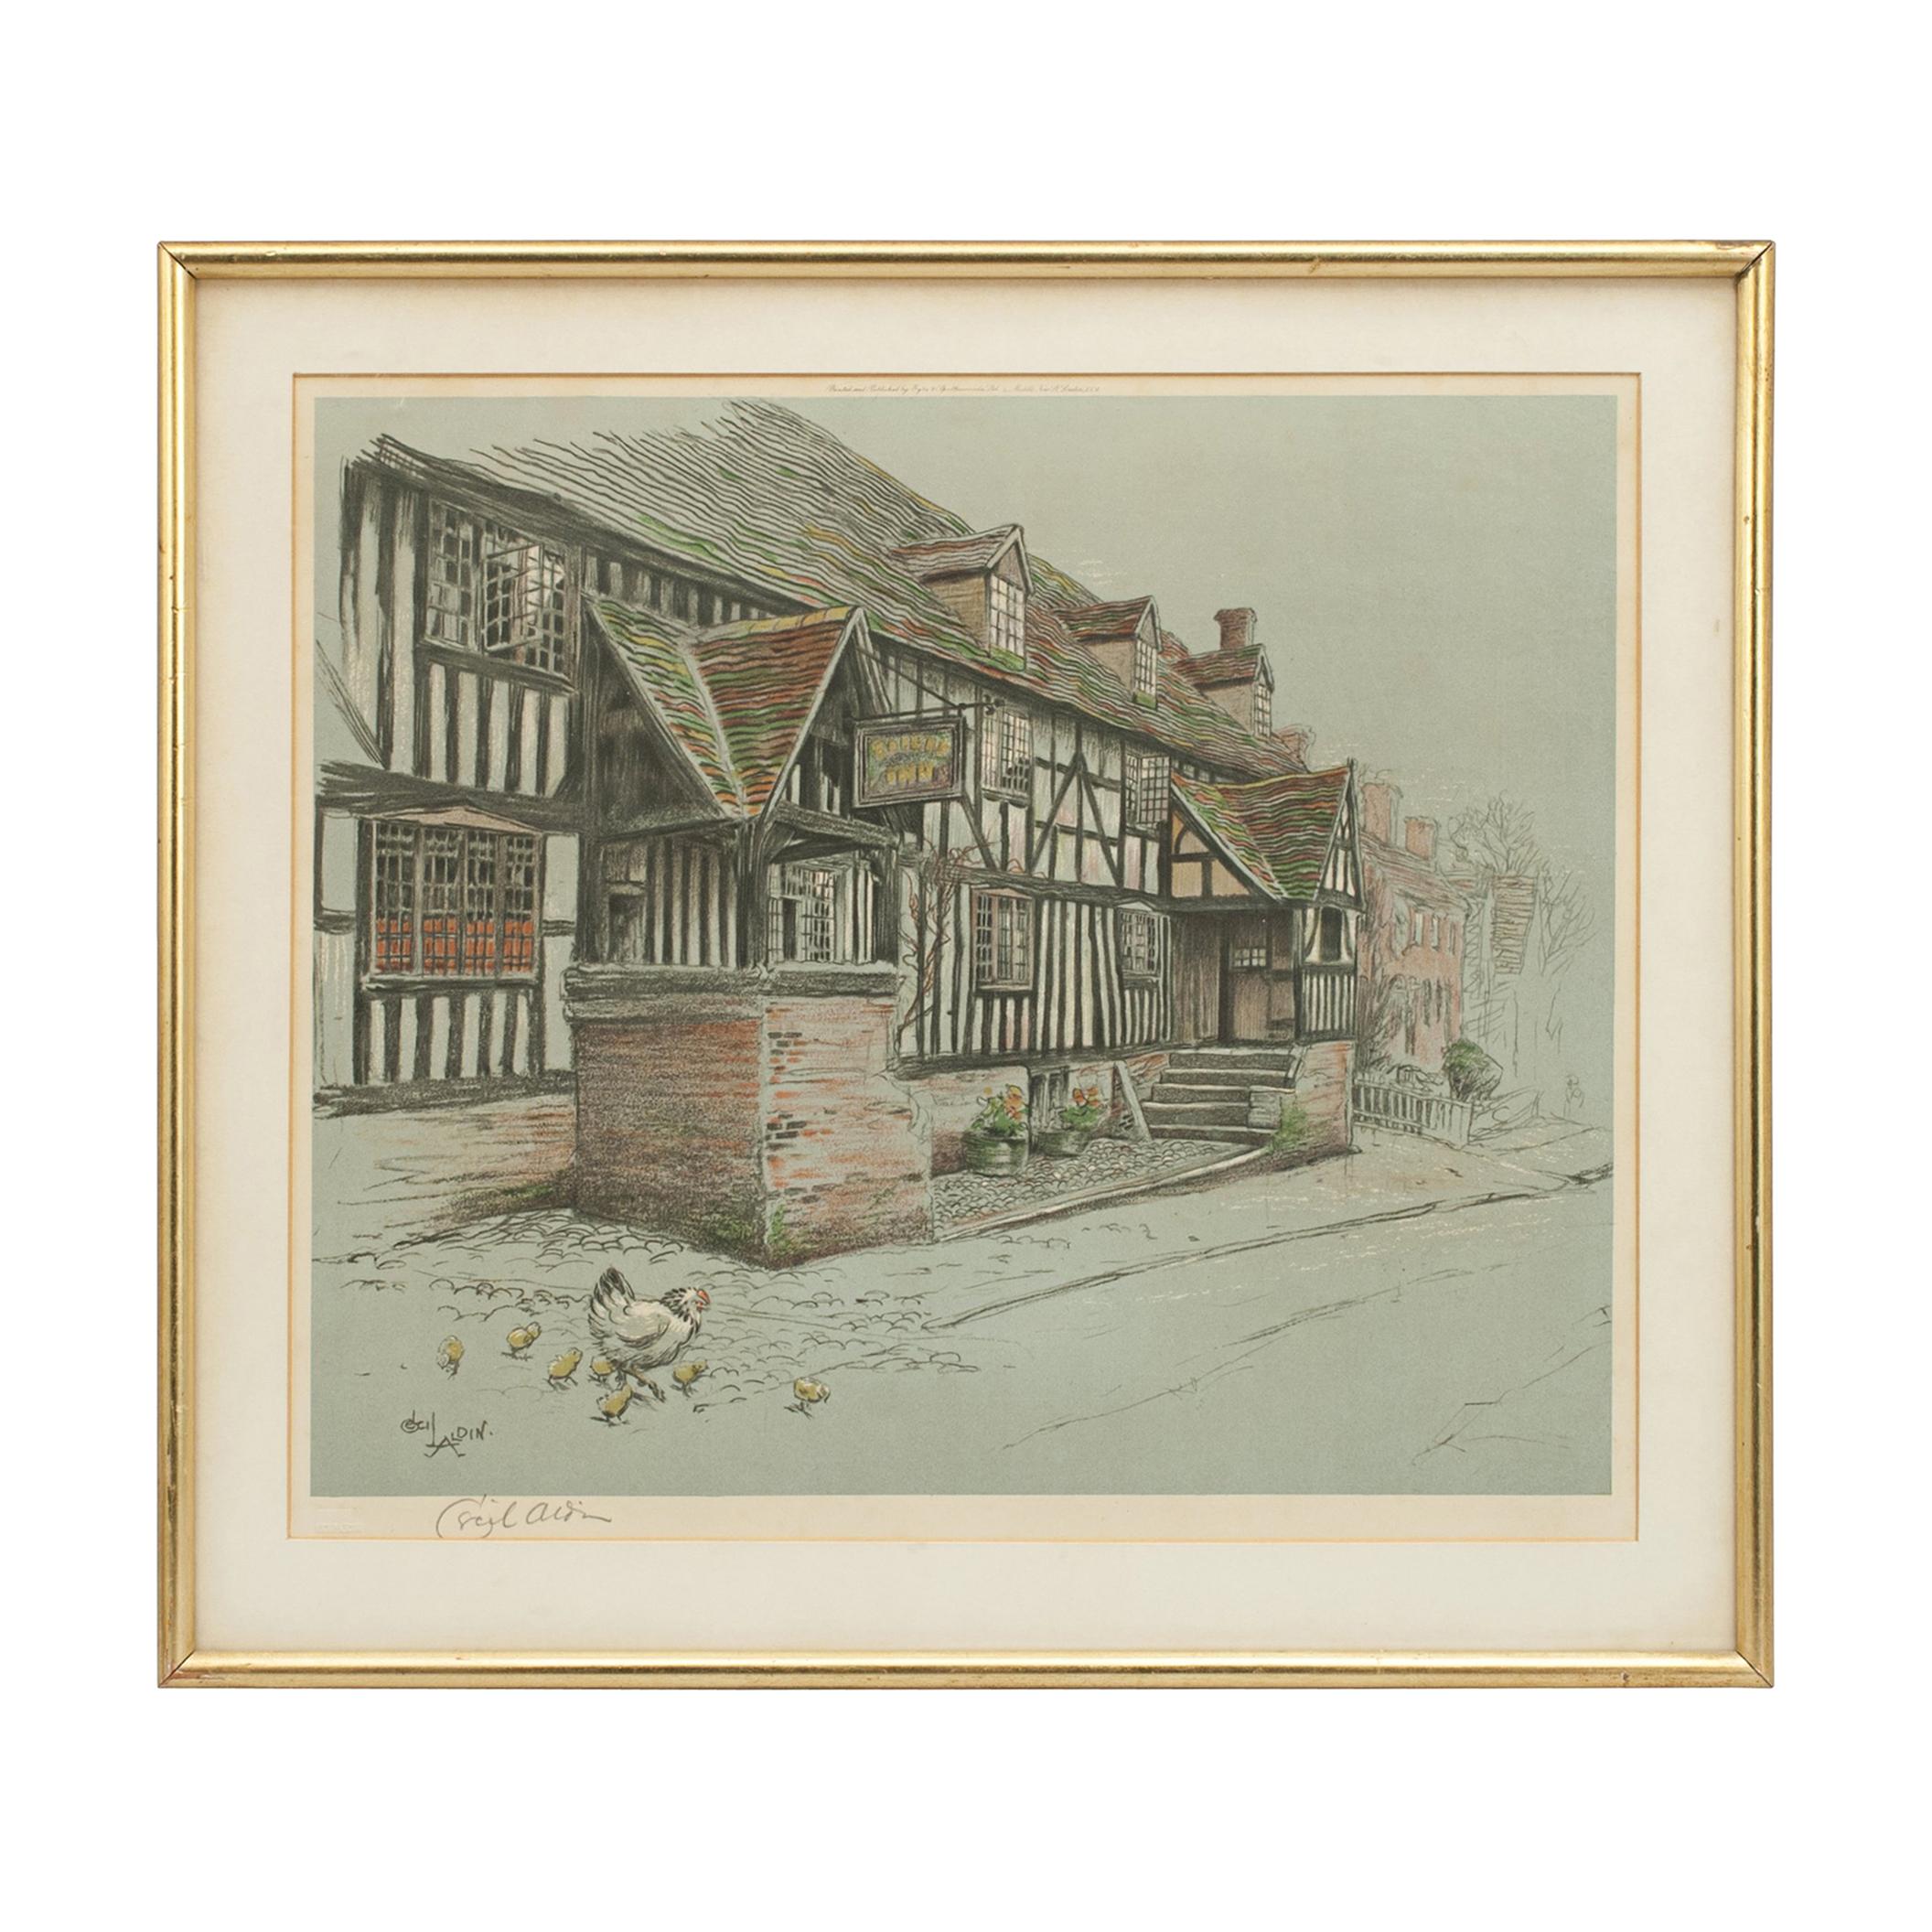 Old English Inns by Cecil Aldin, the Talbot Inn, Signed in Pencil, circa 1921